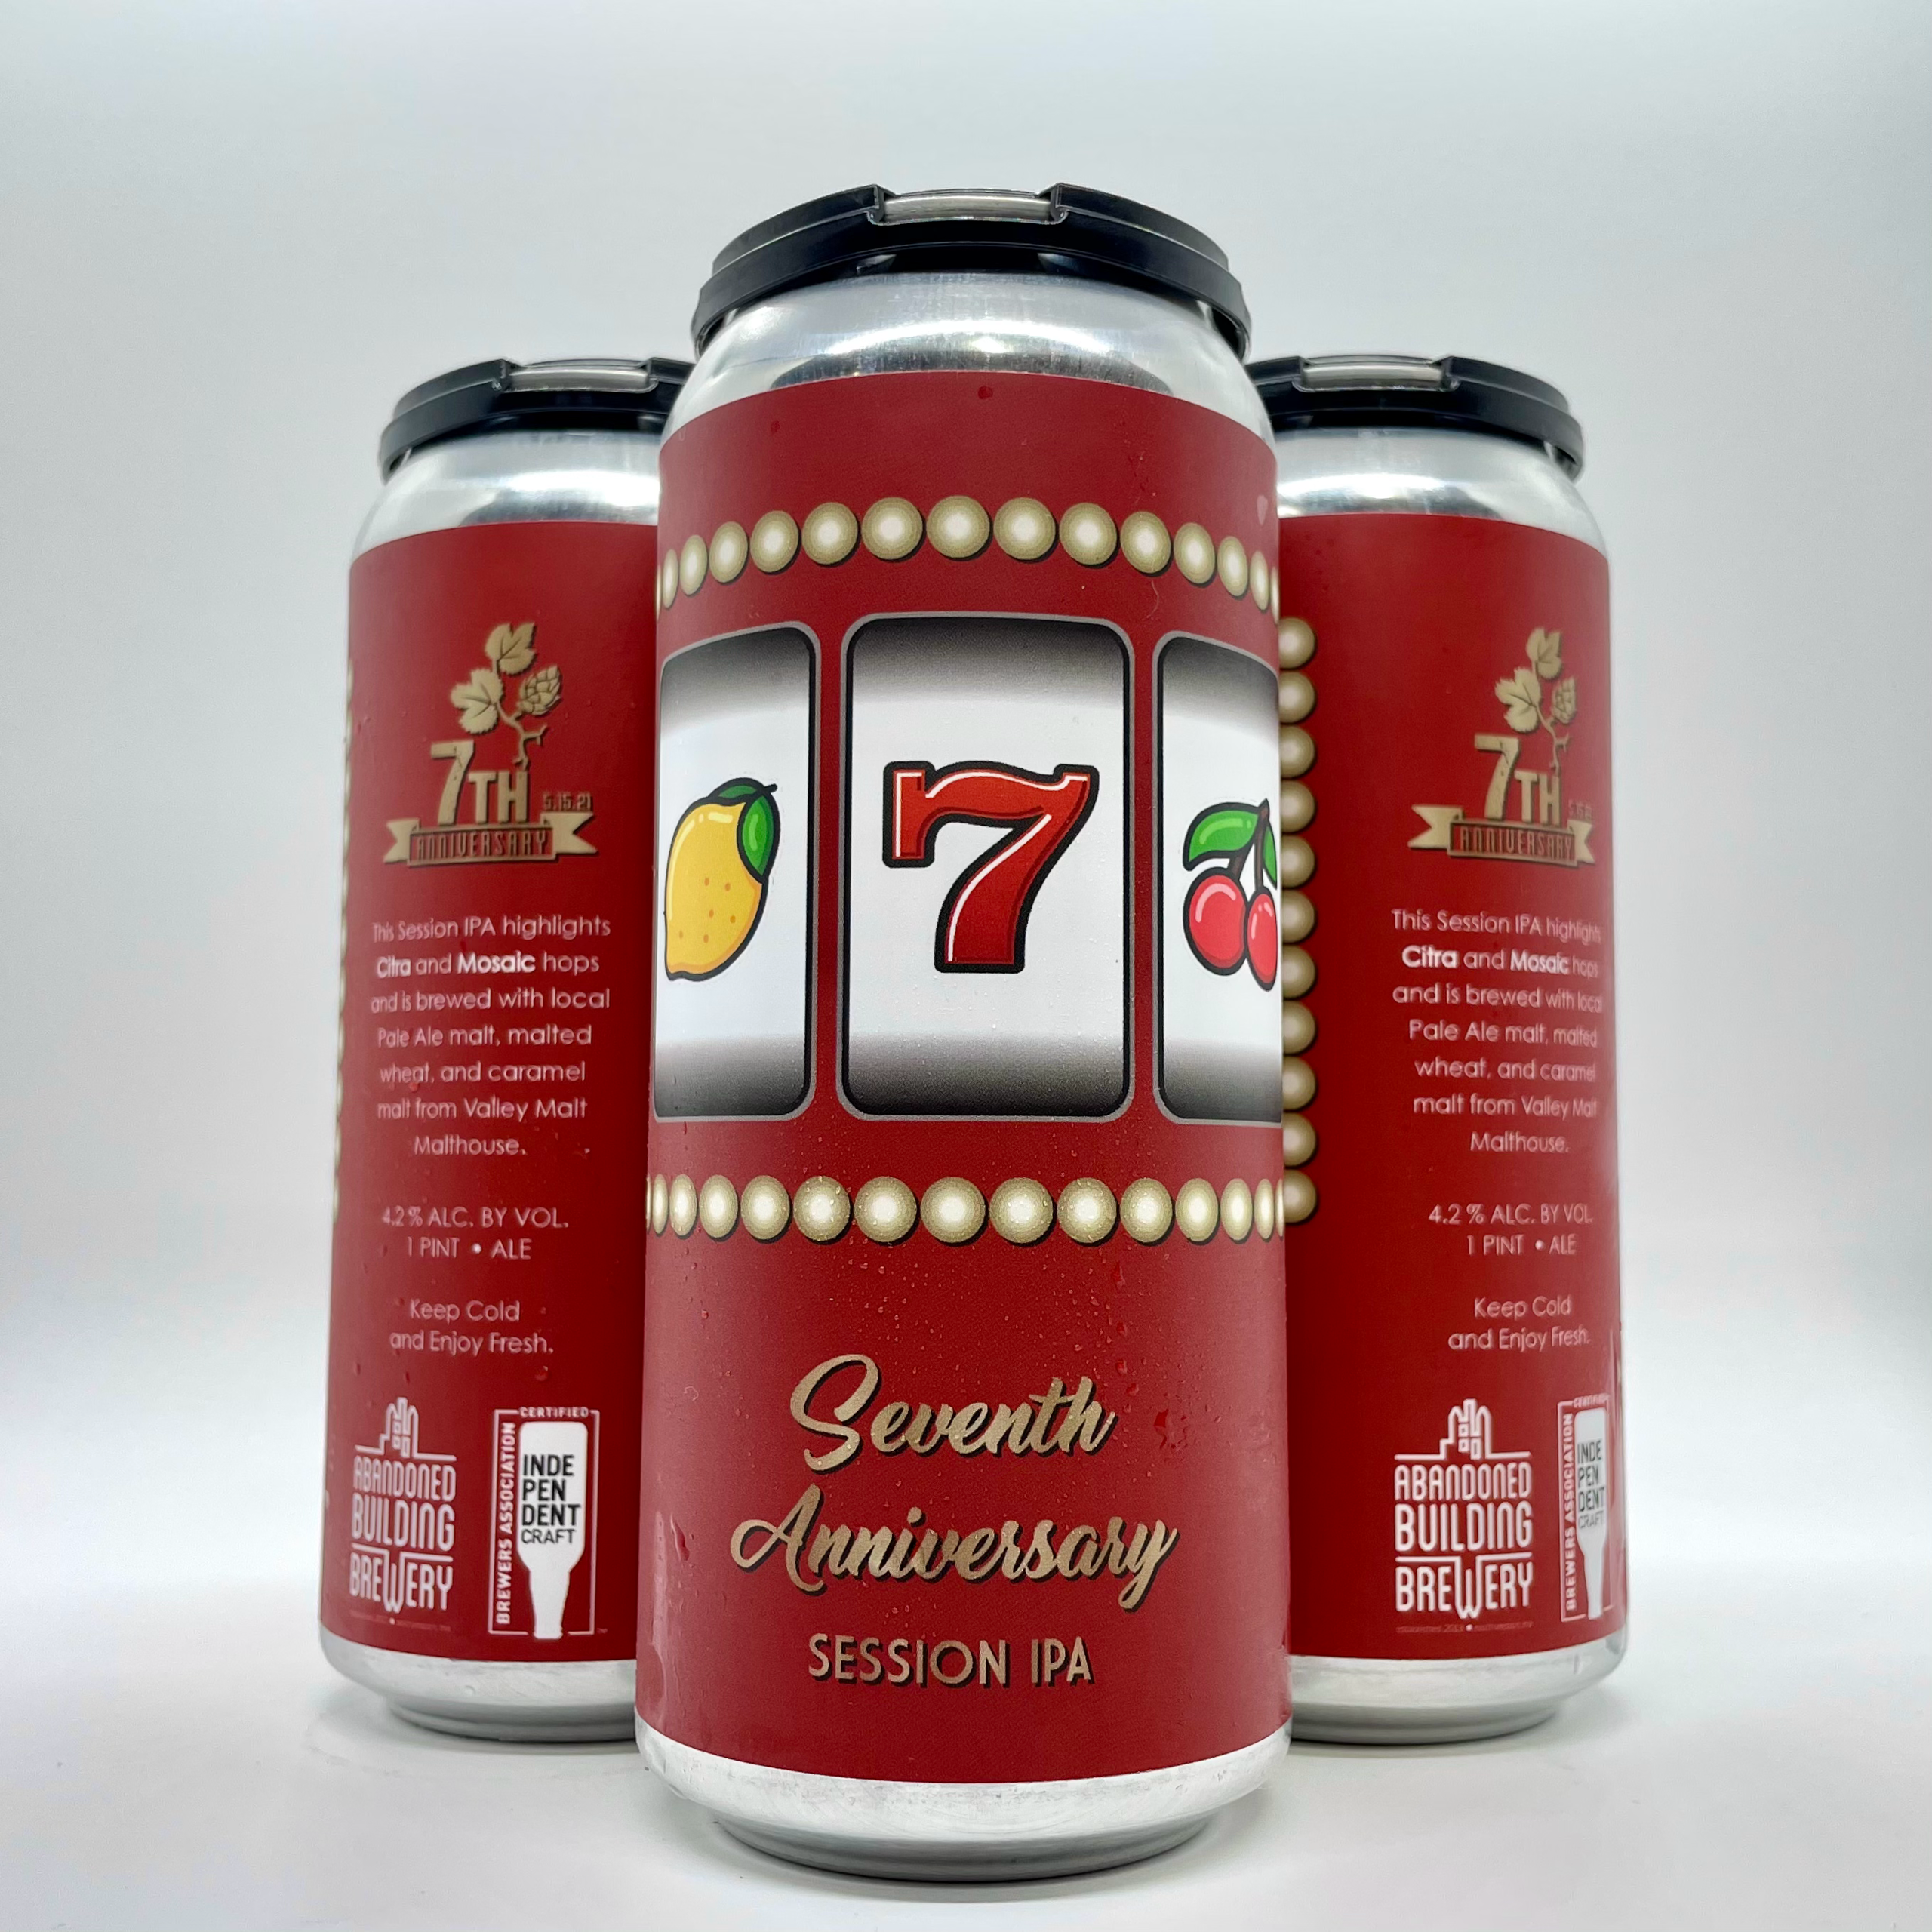 Pre-Order: 7th Anniversary Session IPA - 4 Pack